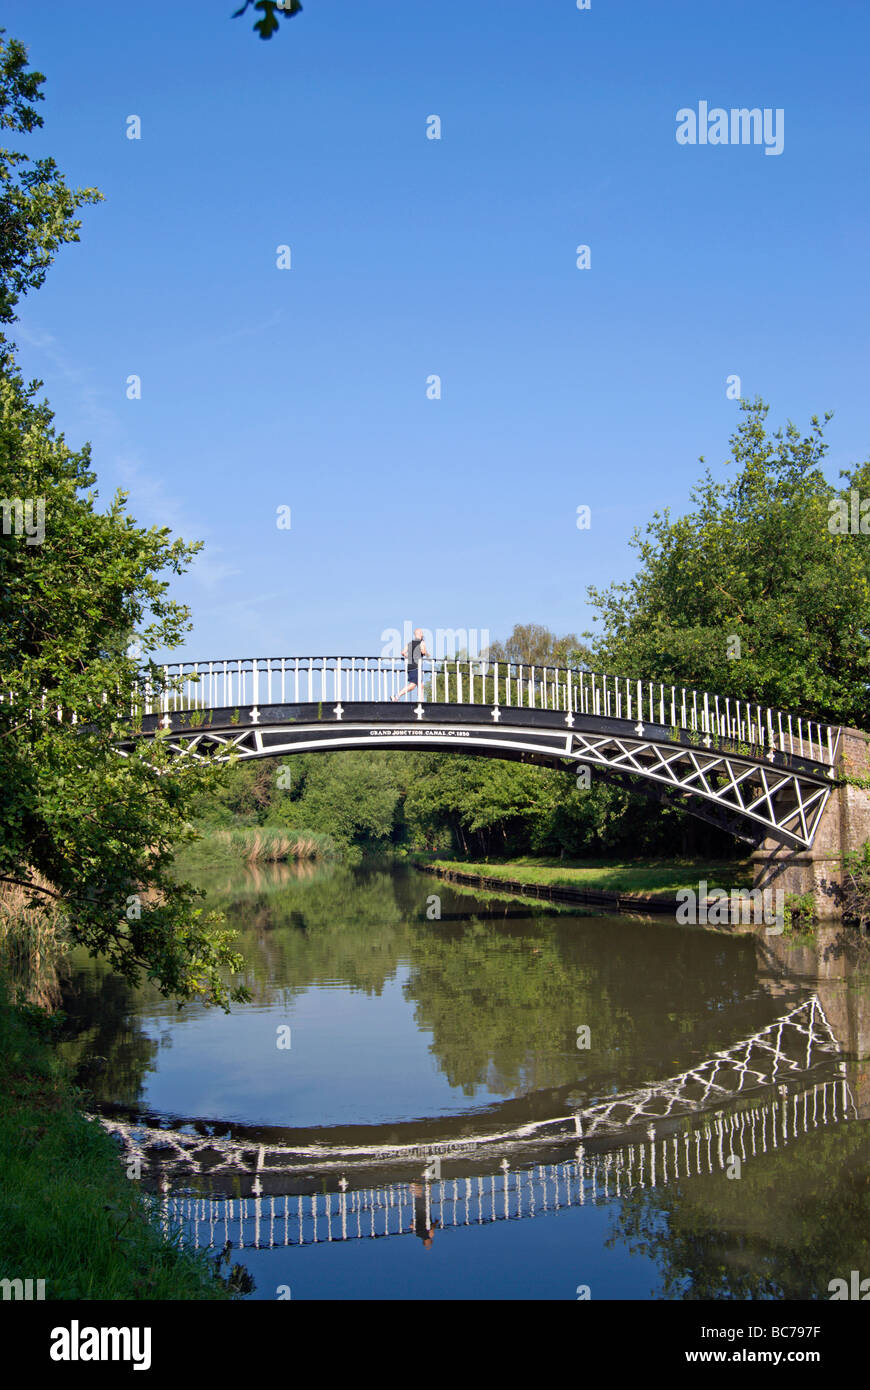 the 1820 gallows bridge crossing the grand union canal, with male jogger in centre, in brentford, west london, england Stock Photo